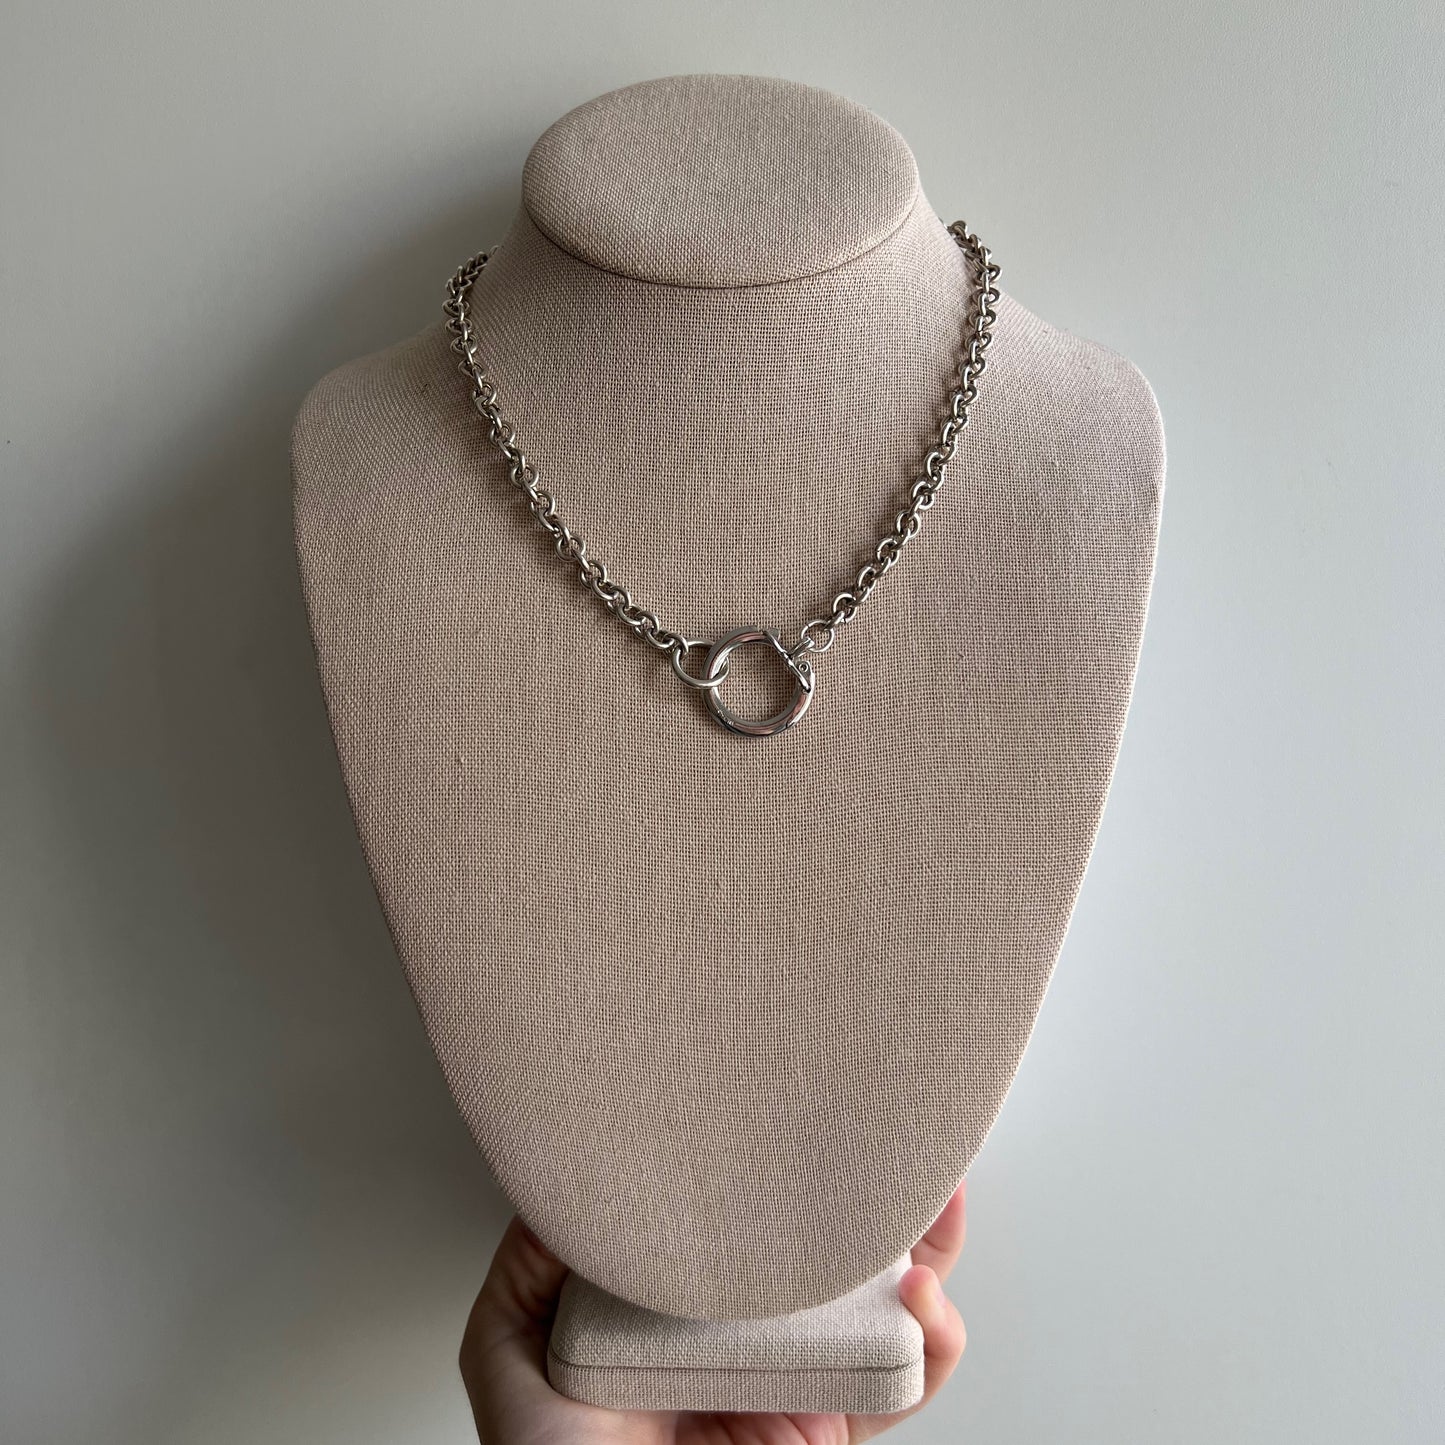 reimagined V I N T A G E // sterling silver cable chain with charm connector clasp / almost 17"